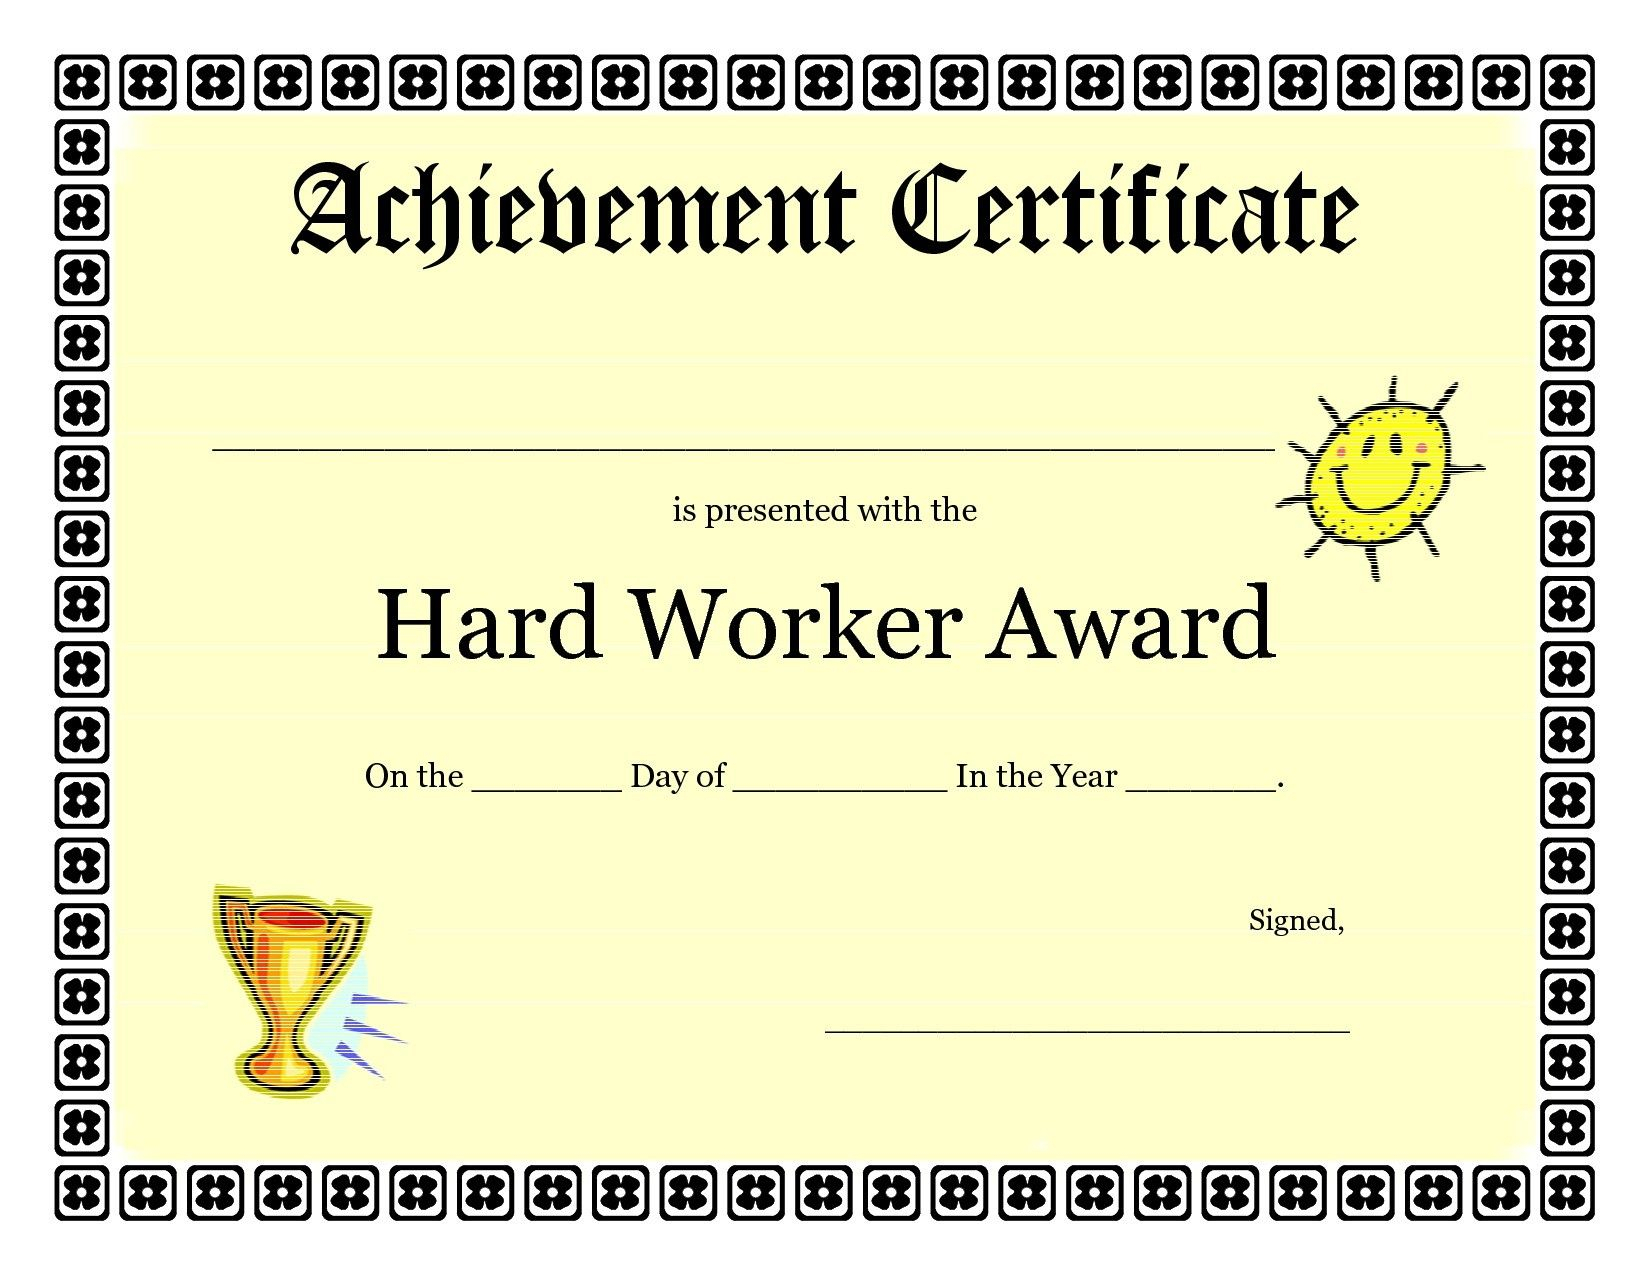 Free Vbs Certificate Templates New Printable Achievement Throughout Vbs Certificate Template